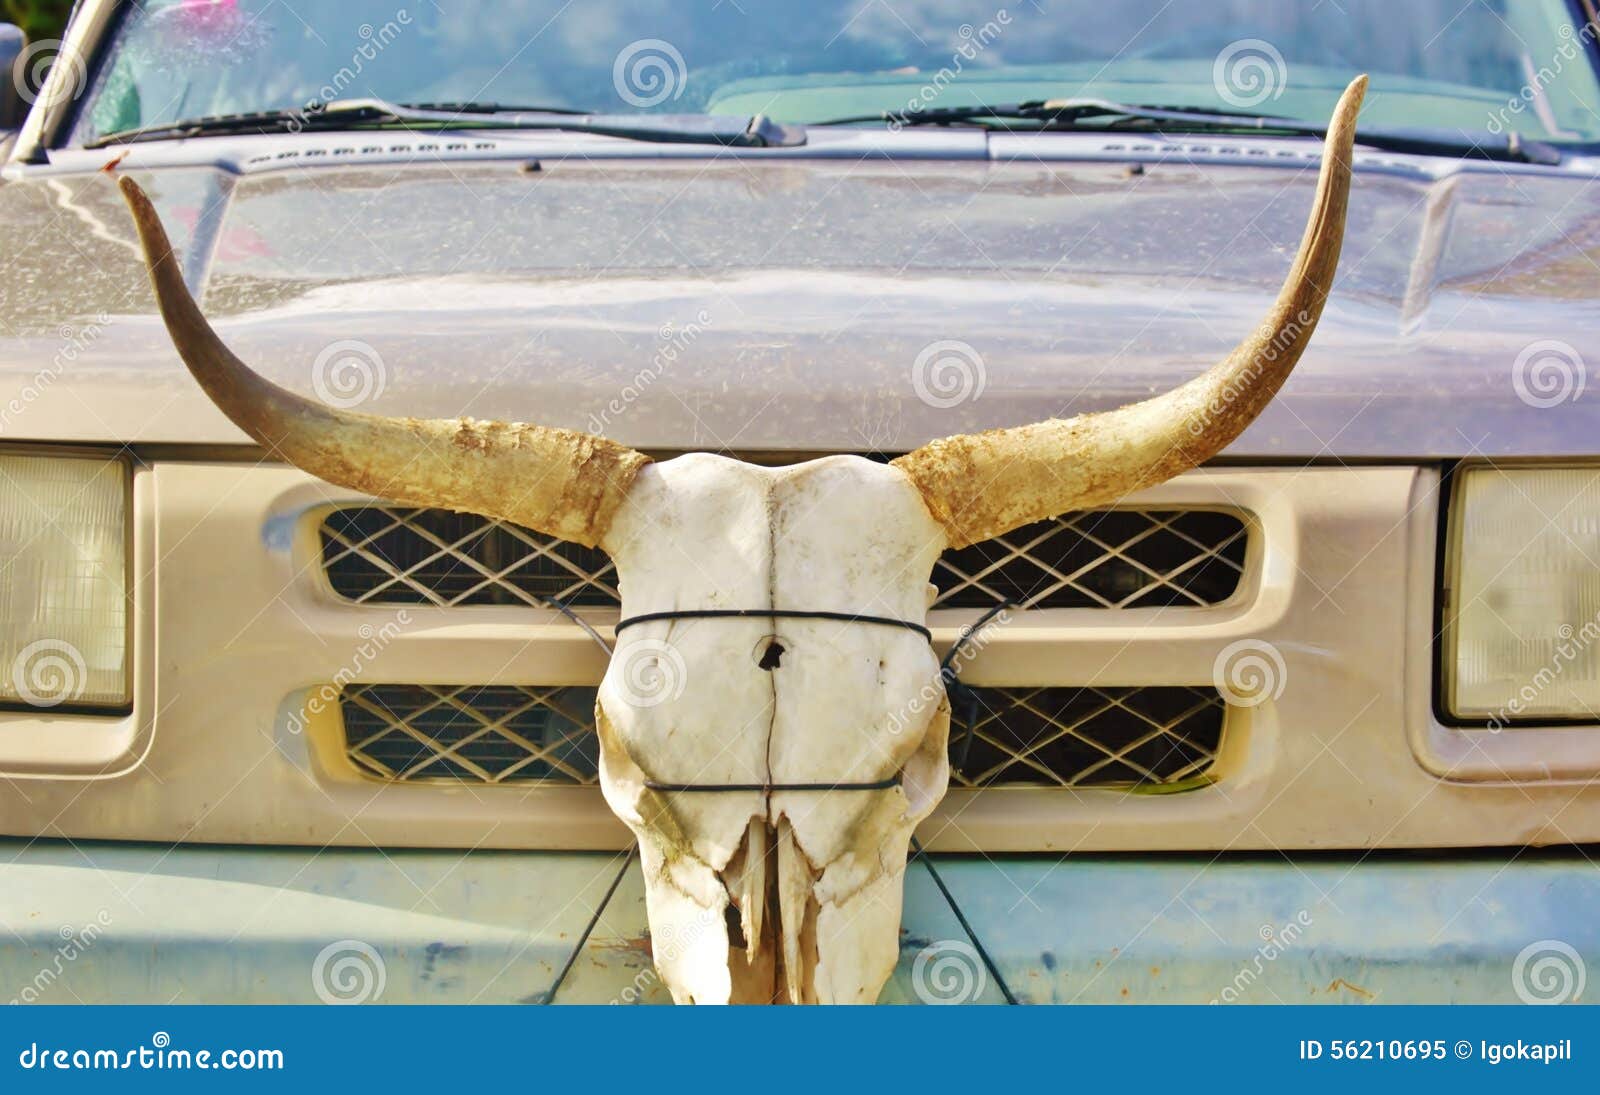 longhorn-skull-car-bumper-there-desire-to-make-different-others-sometimes-looks-weird-rural-areas-56210695.jpg